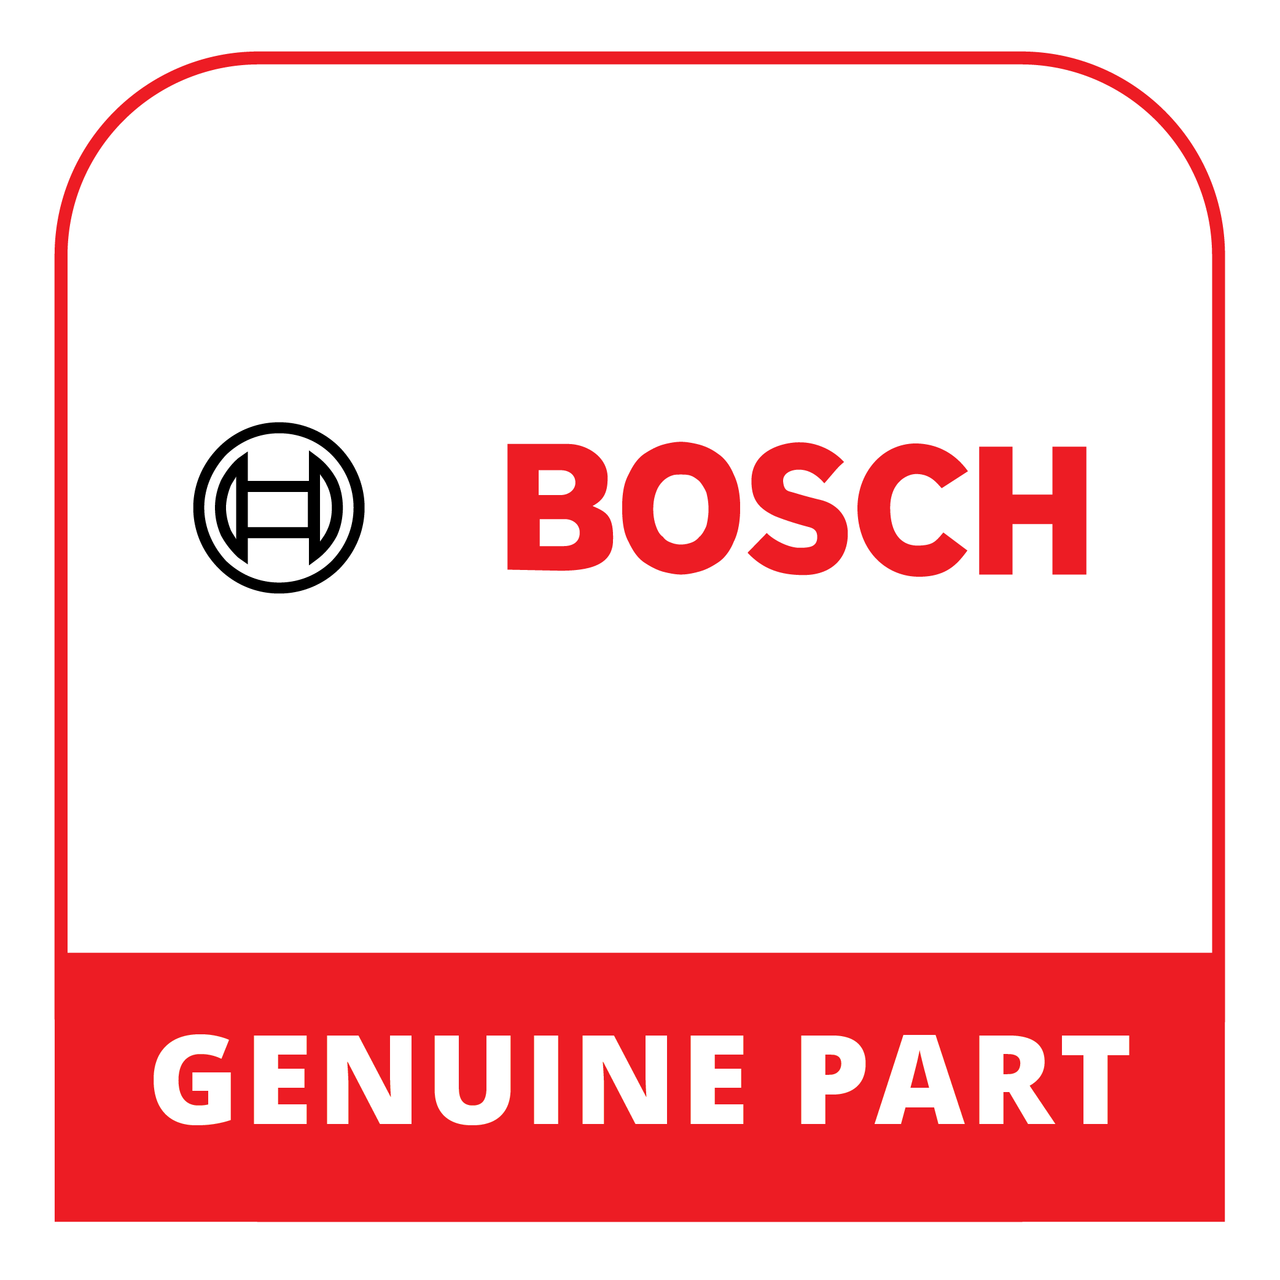 Bosch (Thermador) 11058820 - Panel - Genuine Bosch (Thermador) Part